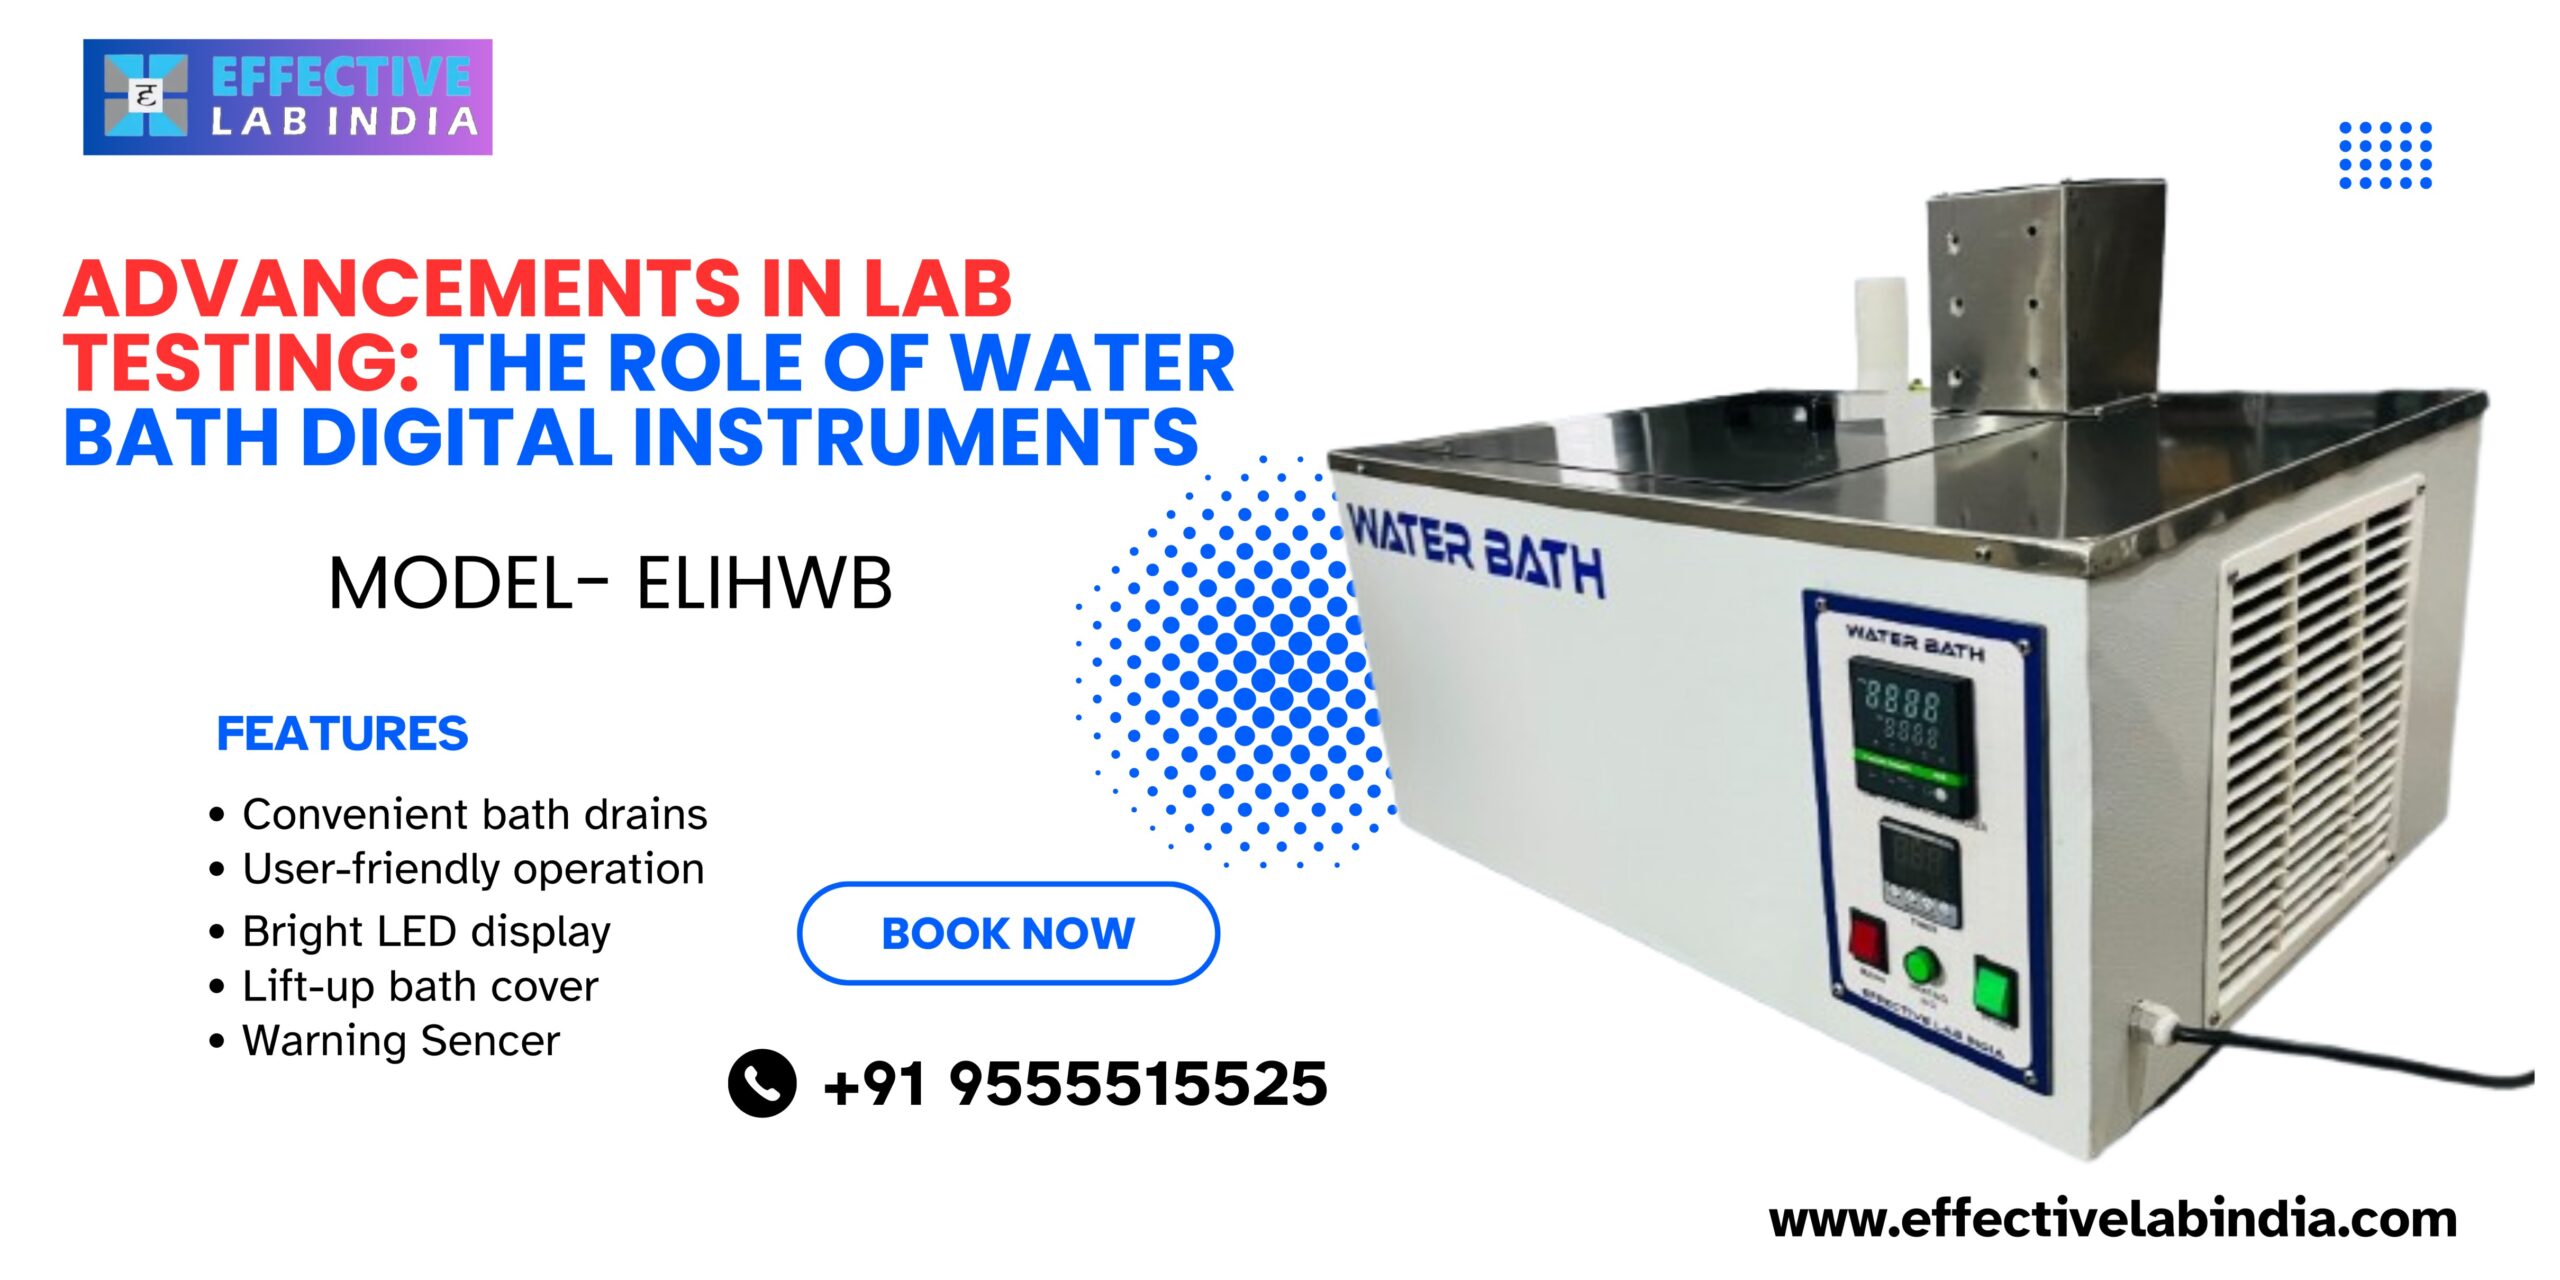 Advancements in Lab Testing: The Role of Water Bath Digital Instruments